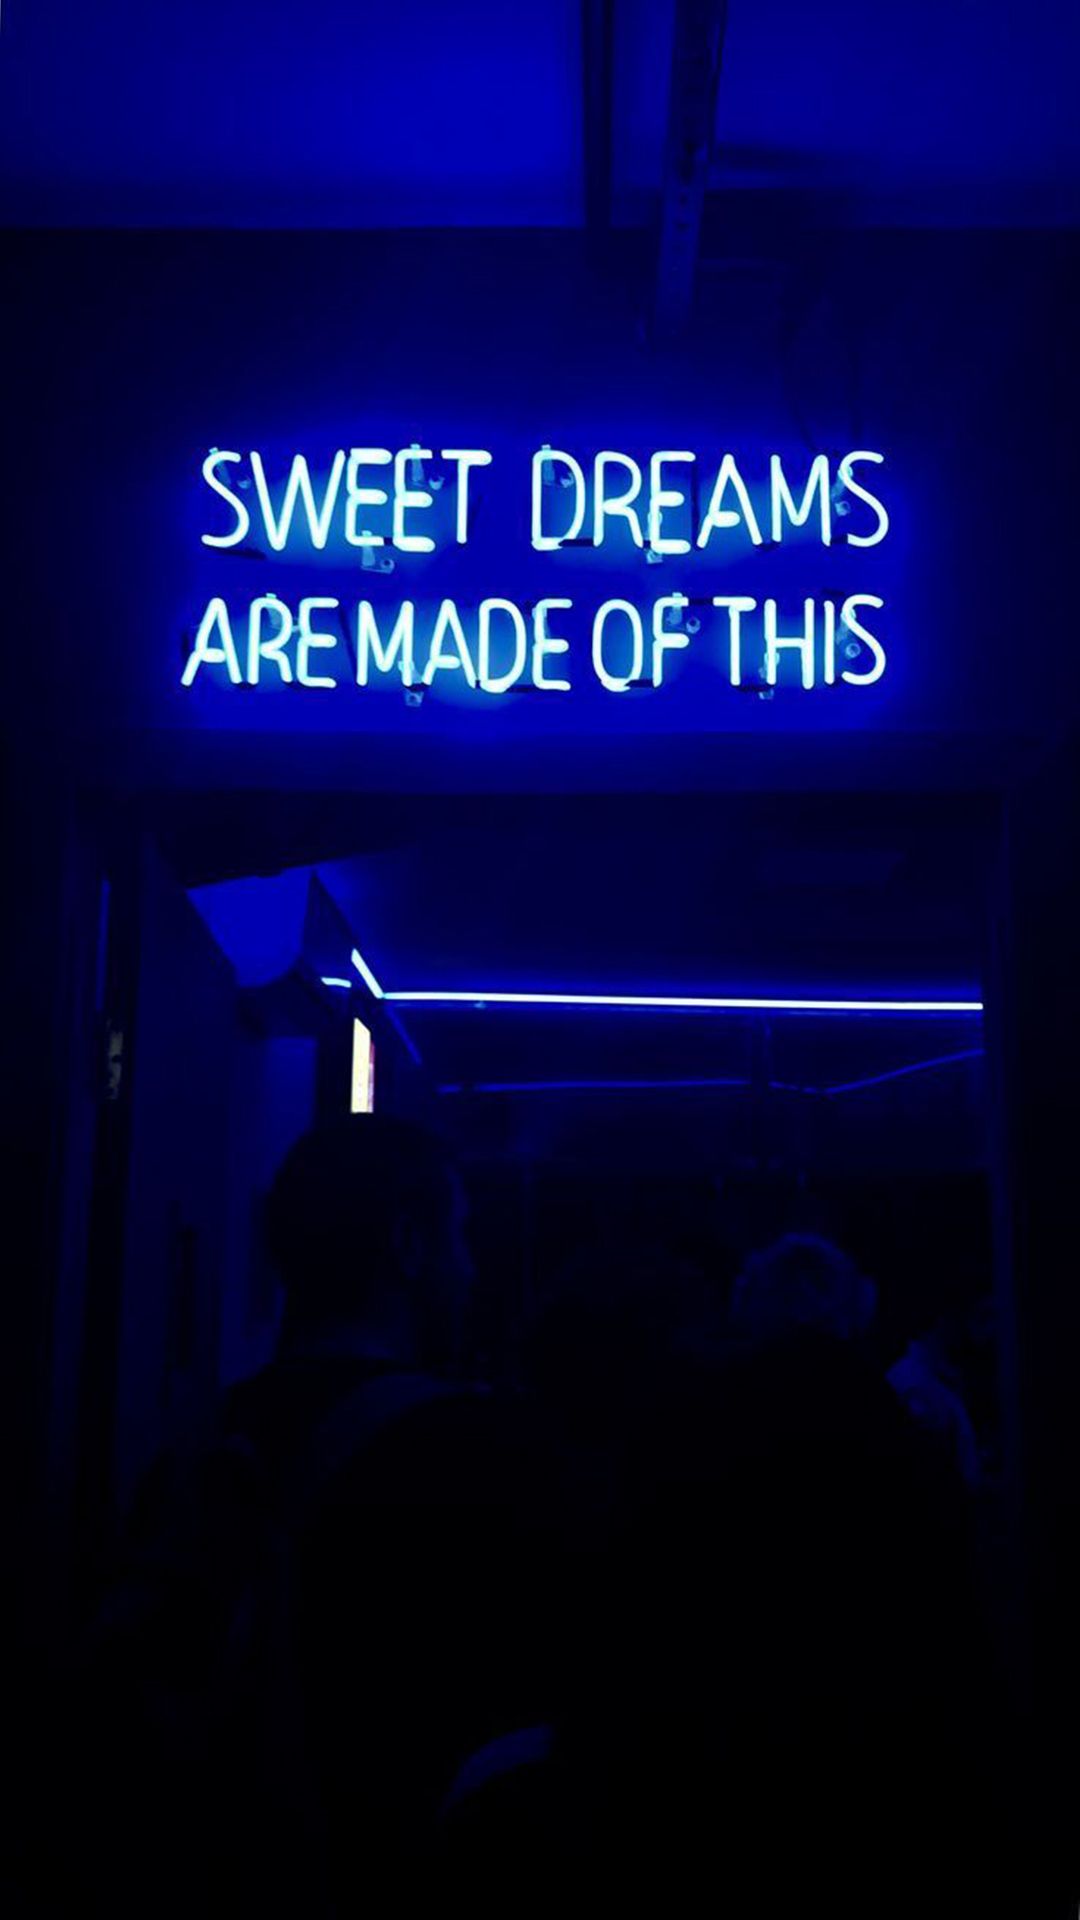 A sign that says sweet dreams are made of this - Blue, dark blue, neon blue, navy blue